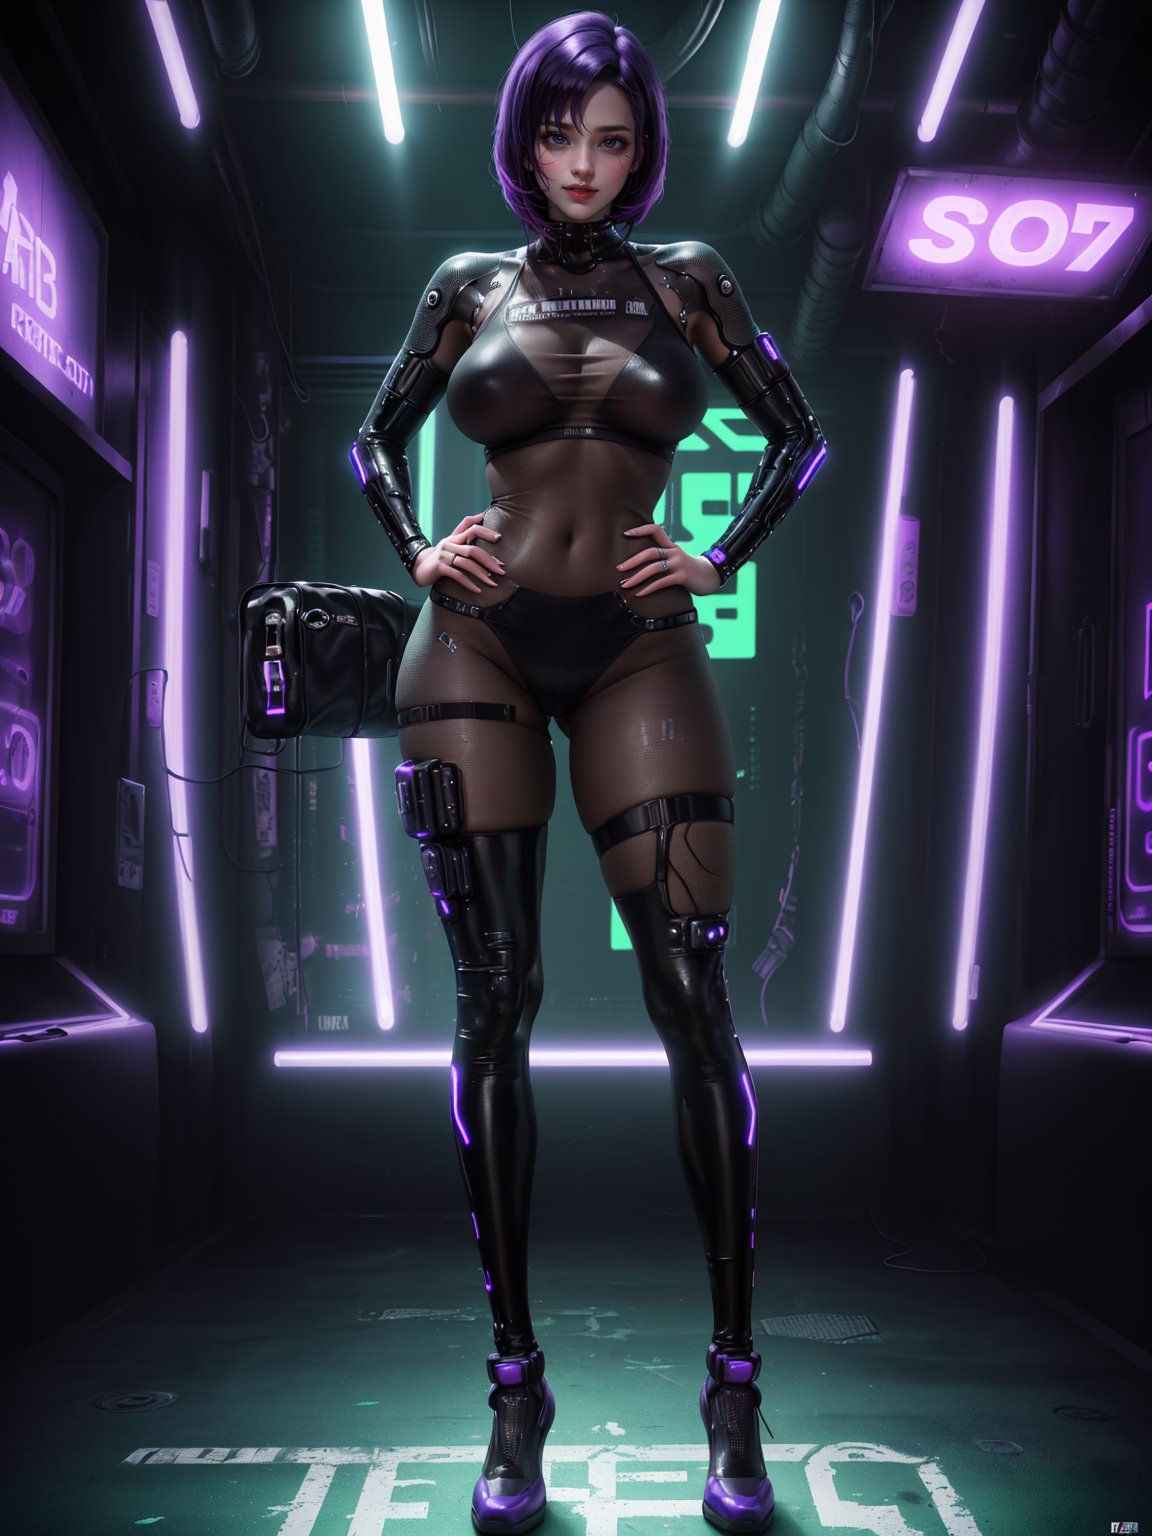 ((Full body):2) {((30 year old woman only):2)}:{((wearing black cyberpunk costume with neon lights extremely tight and tight-fitting, see-through costume):1.5), (( extremely large breasts):1.5), only she has ((very short purple hair, green eyes):1.5), ((looking at viewer, maniacal smile):1.5), she is doing ((erotic pose):1.5)}; {Background:Inside a brothel (crowded with women in underwear with different styles and ideas))}, Hyperrealism, 16k, ((best quality, high details):1.4), anatomically correct, masterpiece, UHD